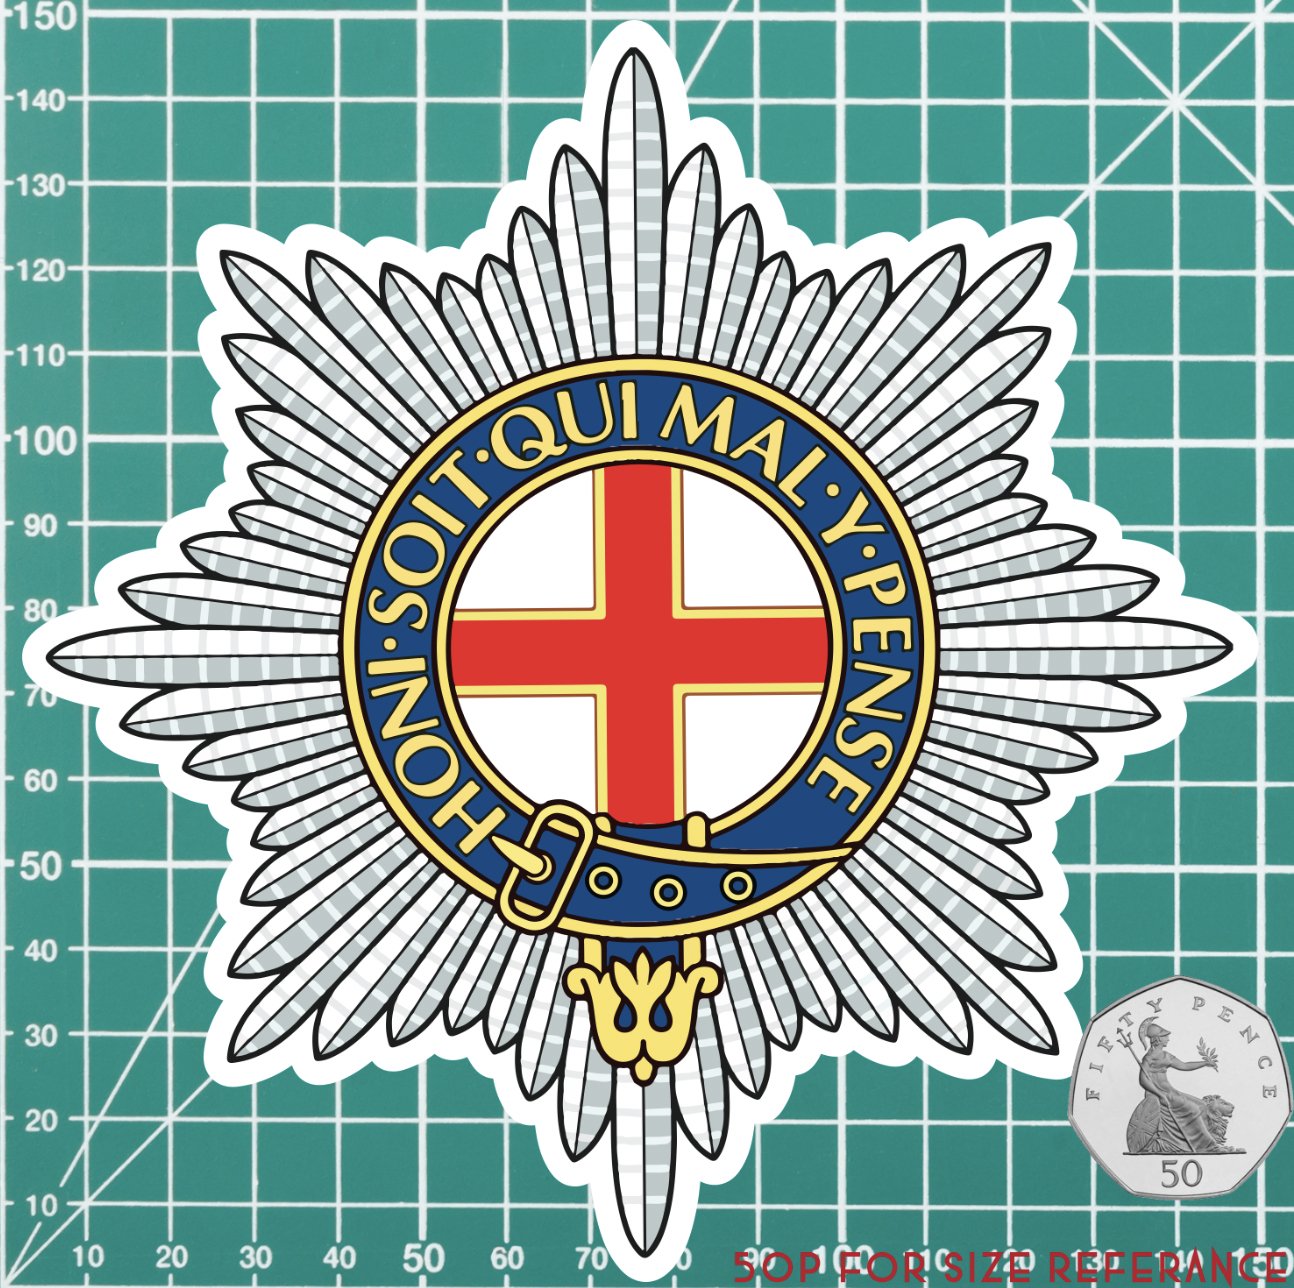 Coldstream Guards Waterproof Vinyl Stickers - FREE SHIPPING redplume